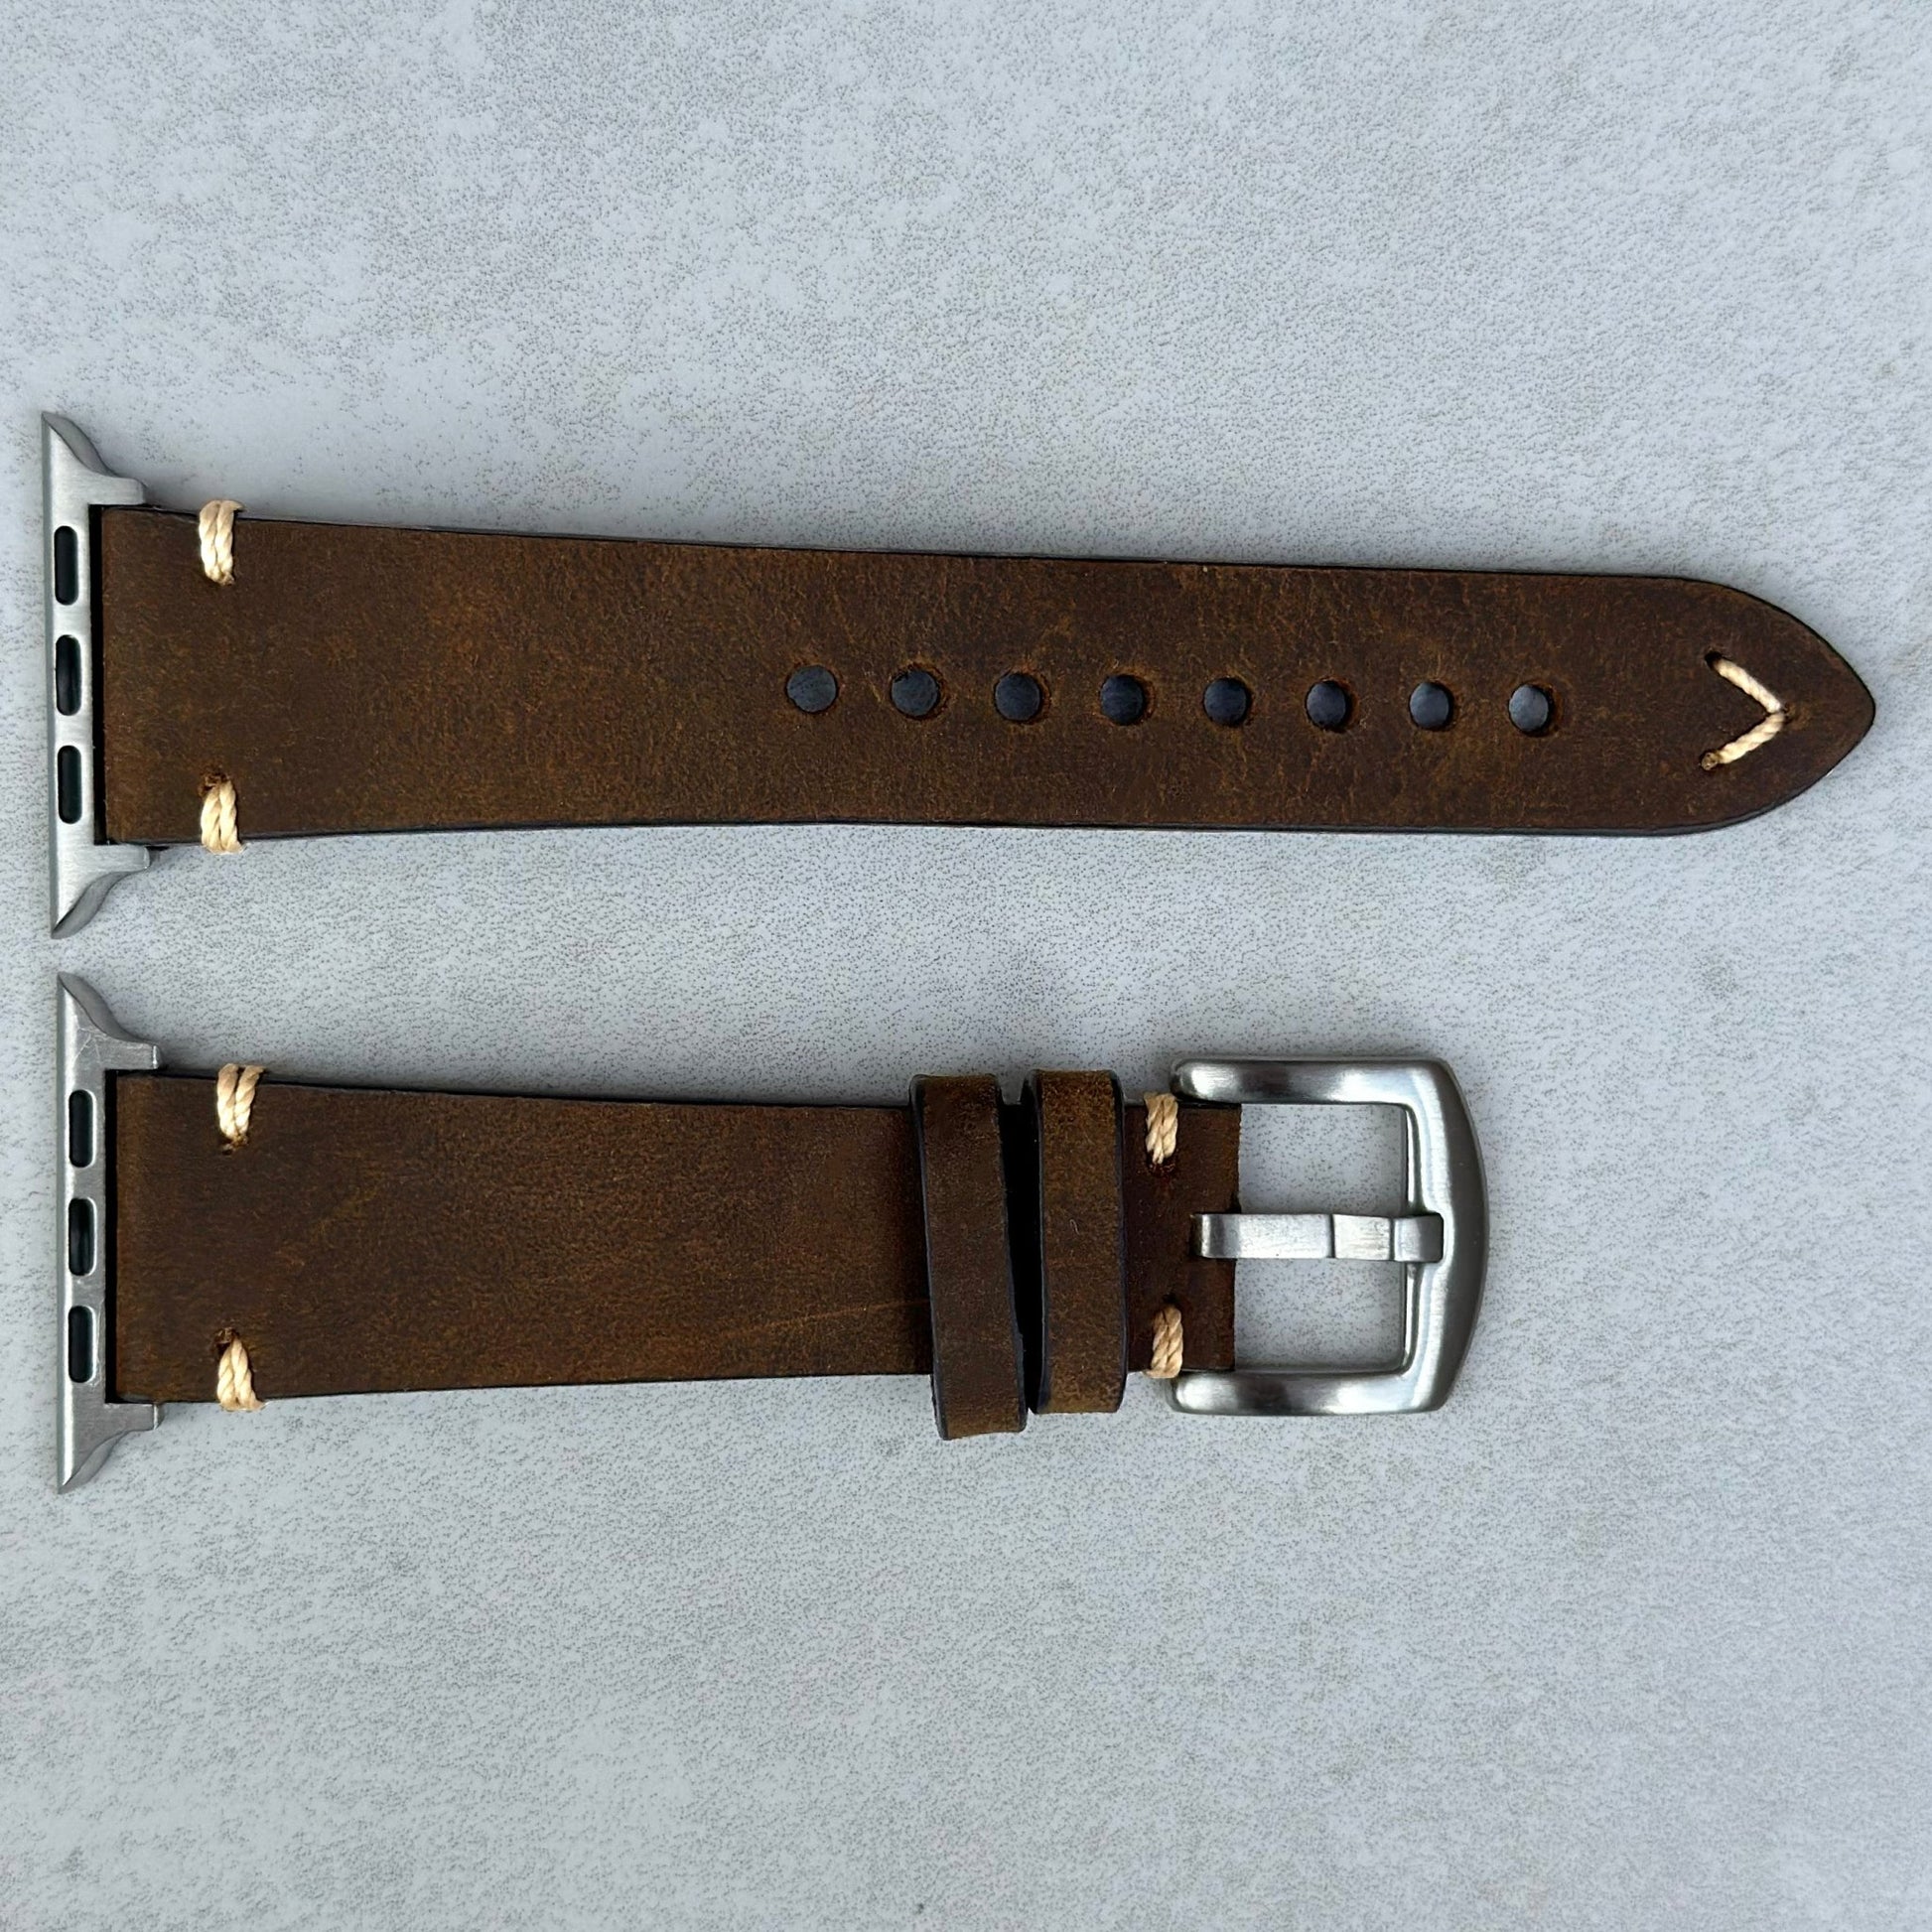 Chocolate brown full grain horse leather. Contrast ivory stitching. Stainless steel hardware. Apple Watch Strap.